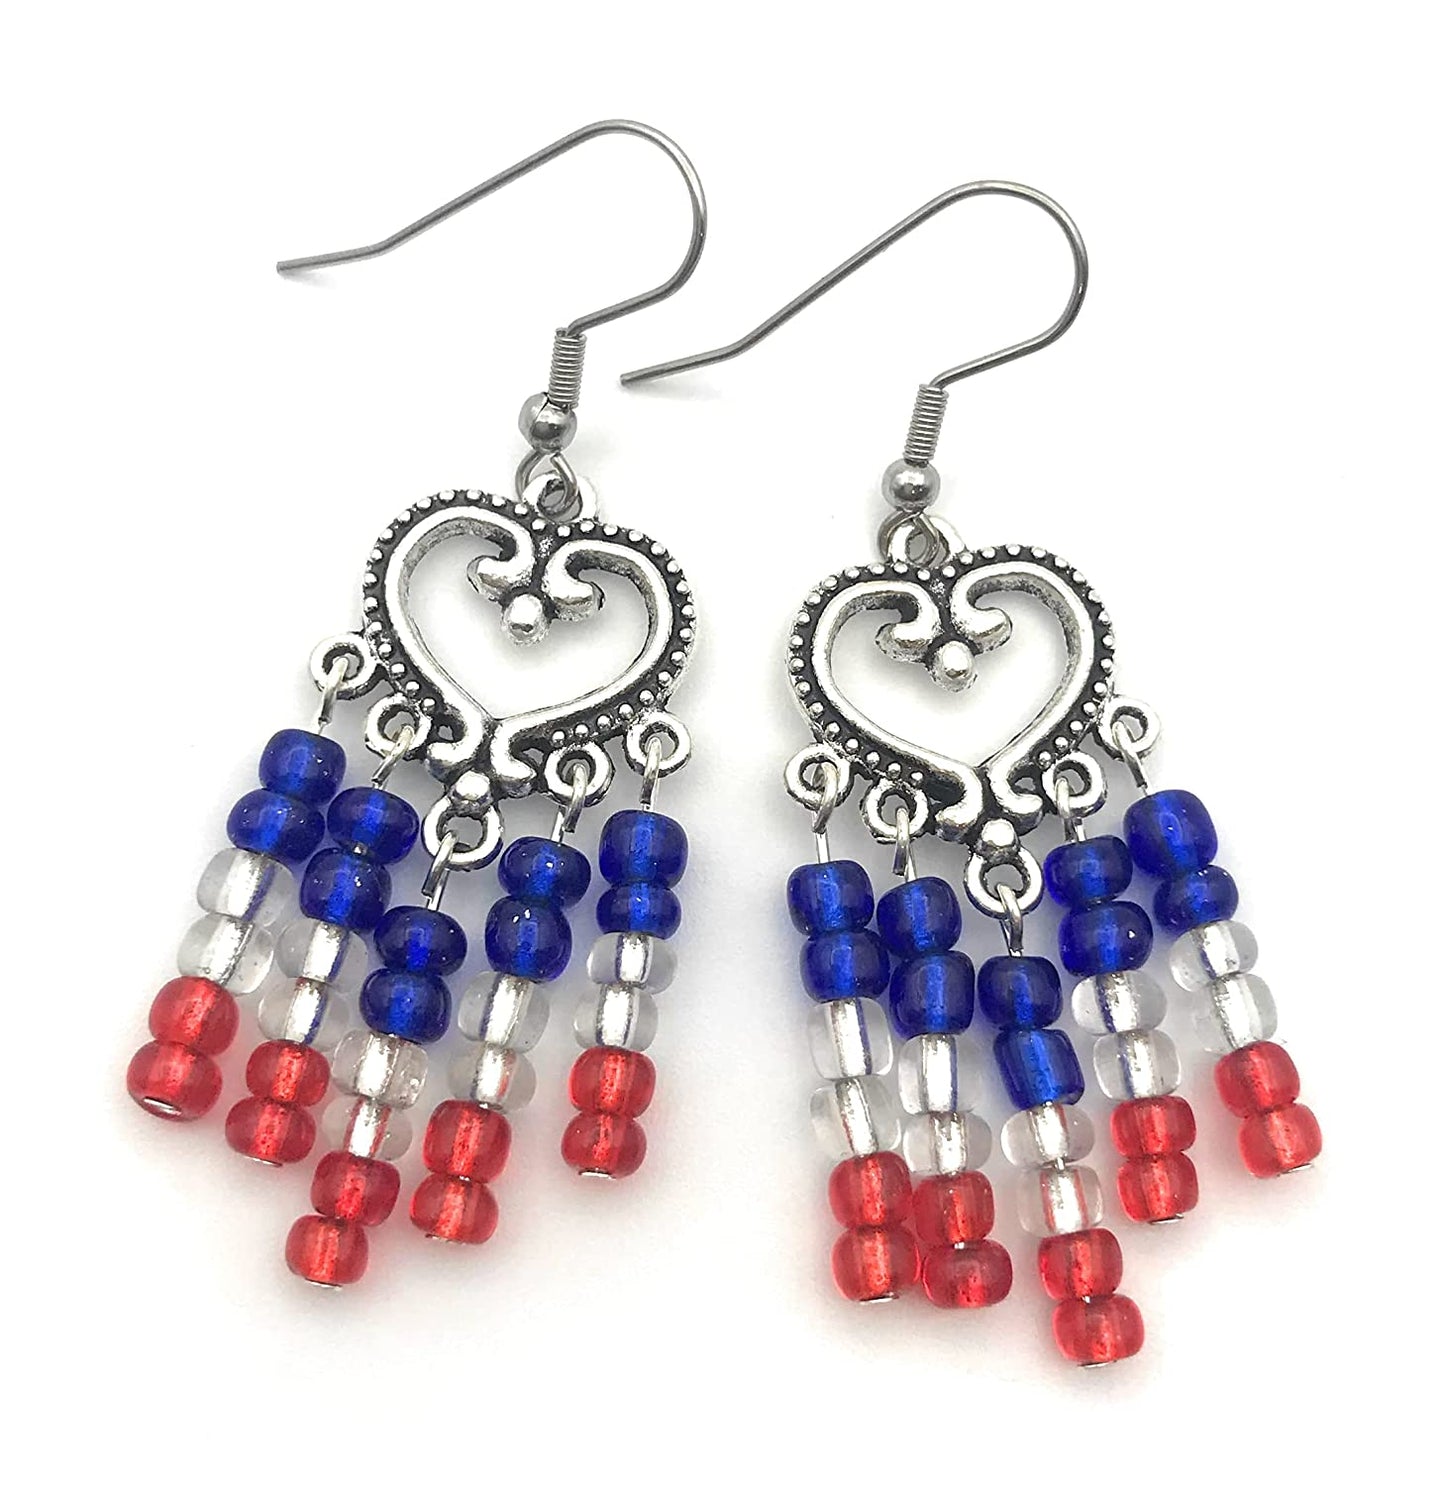 Red White and Blue Earrings from Scott D Jewelry Designs